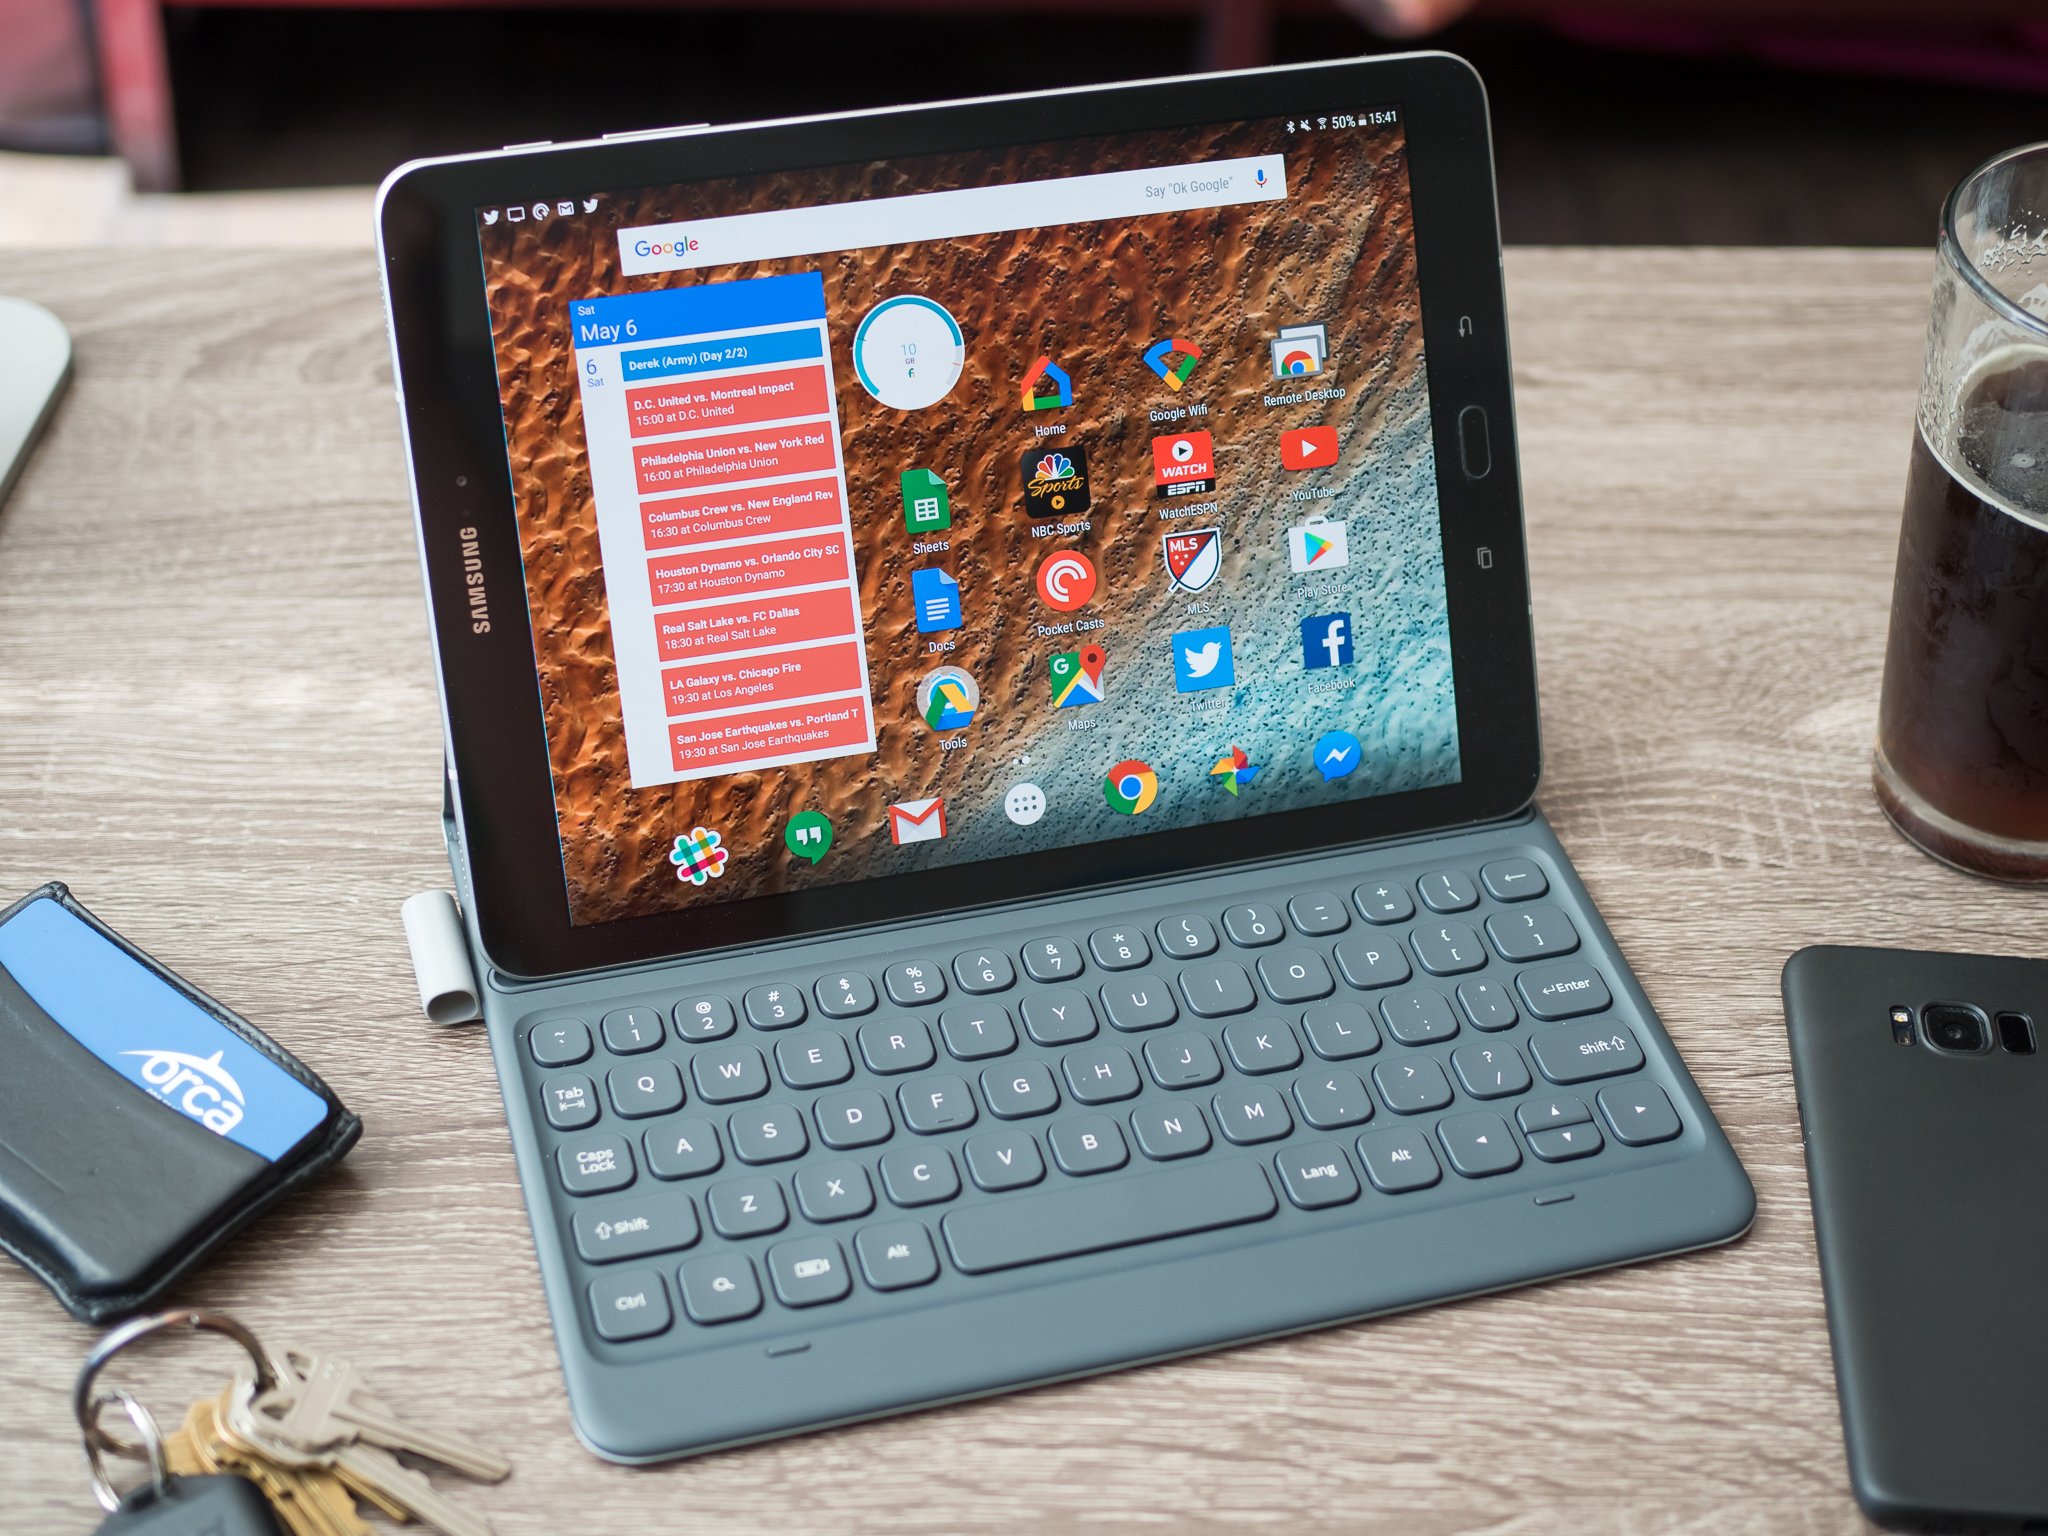 influenza Jong Definitie Best Keyboards for Samsung Galaxy Tab S3 | Android Central